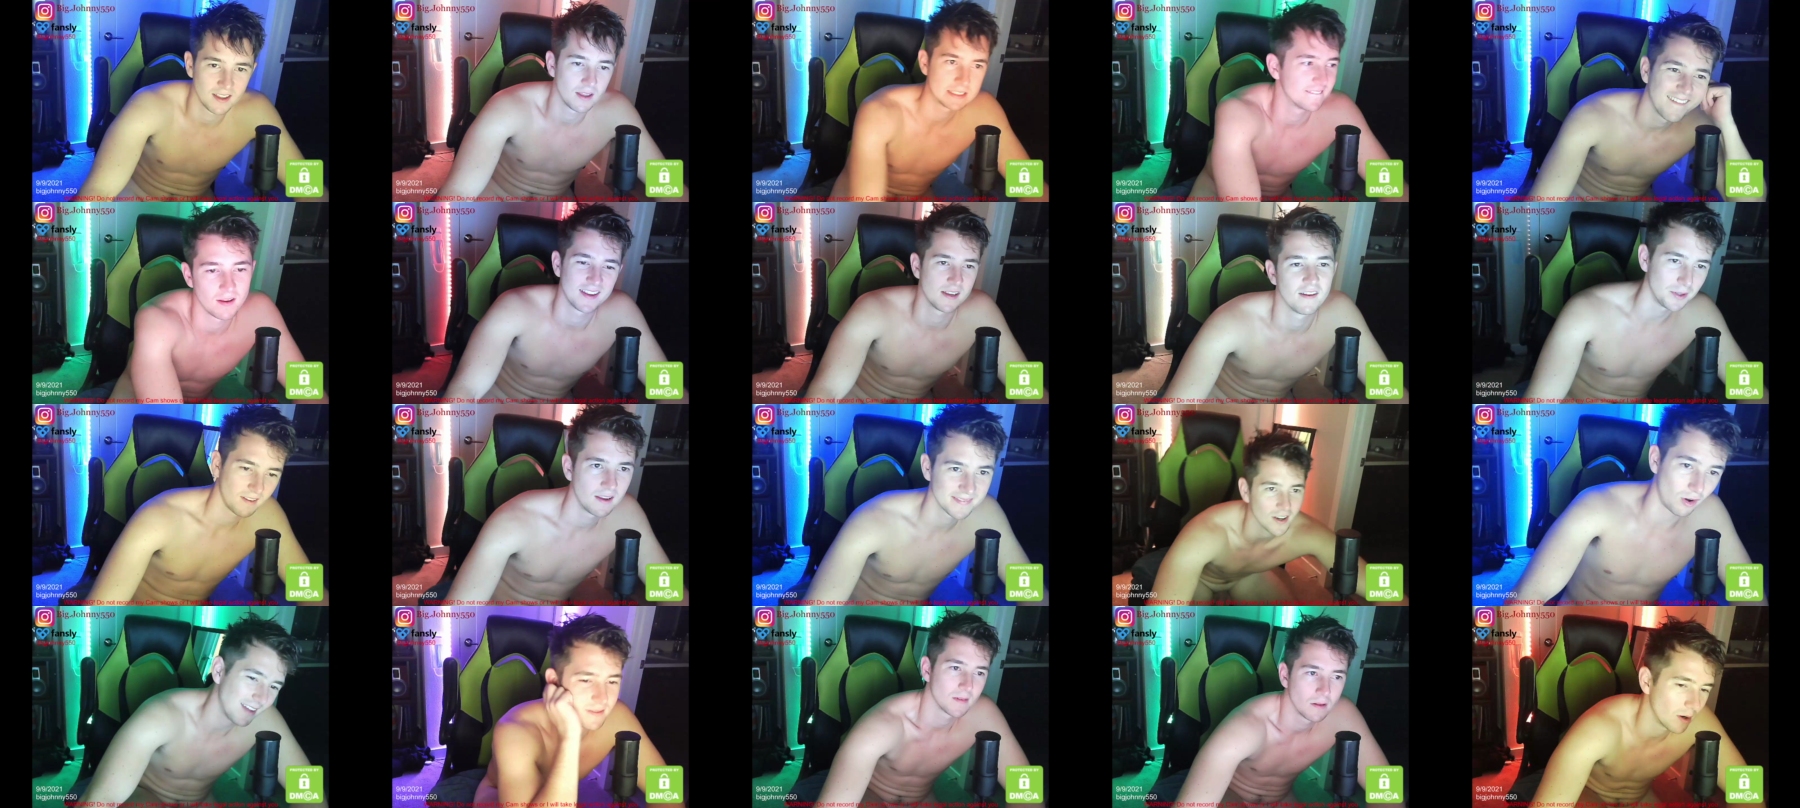 Bigjohnny550  09-09-2021 Male Topless